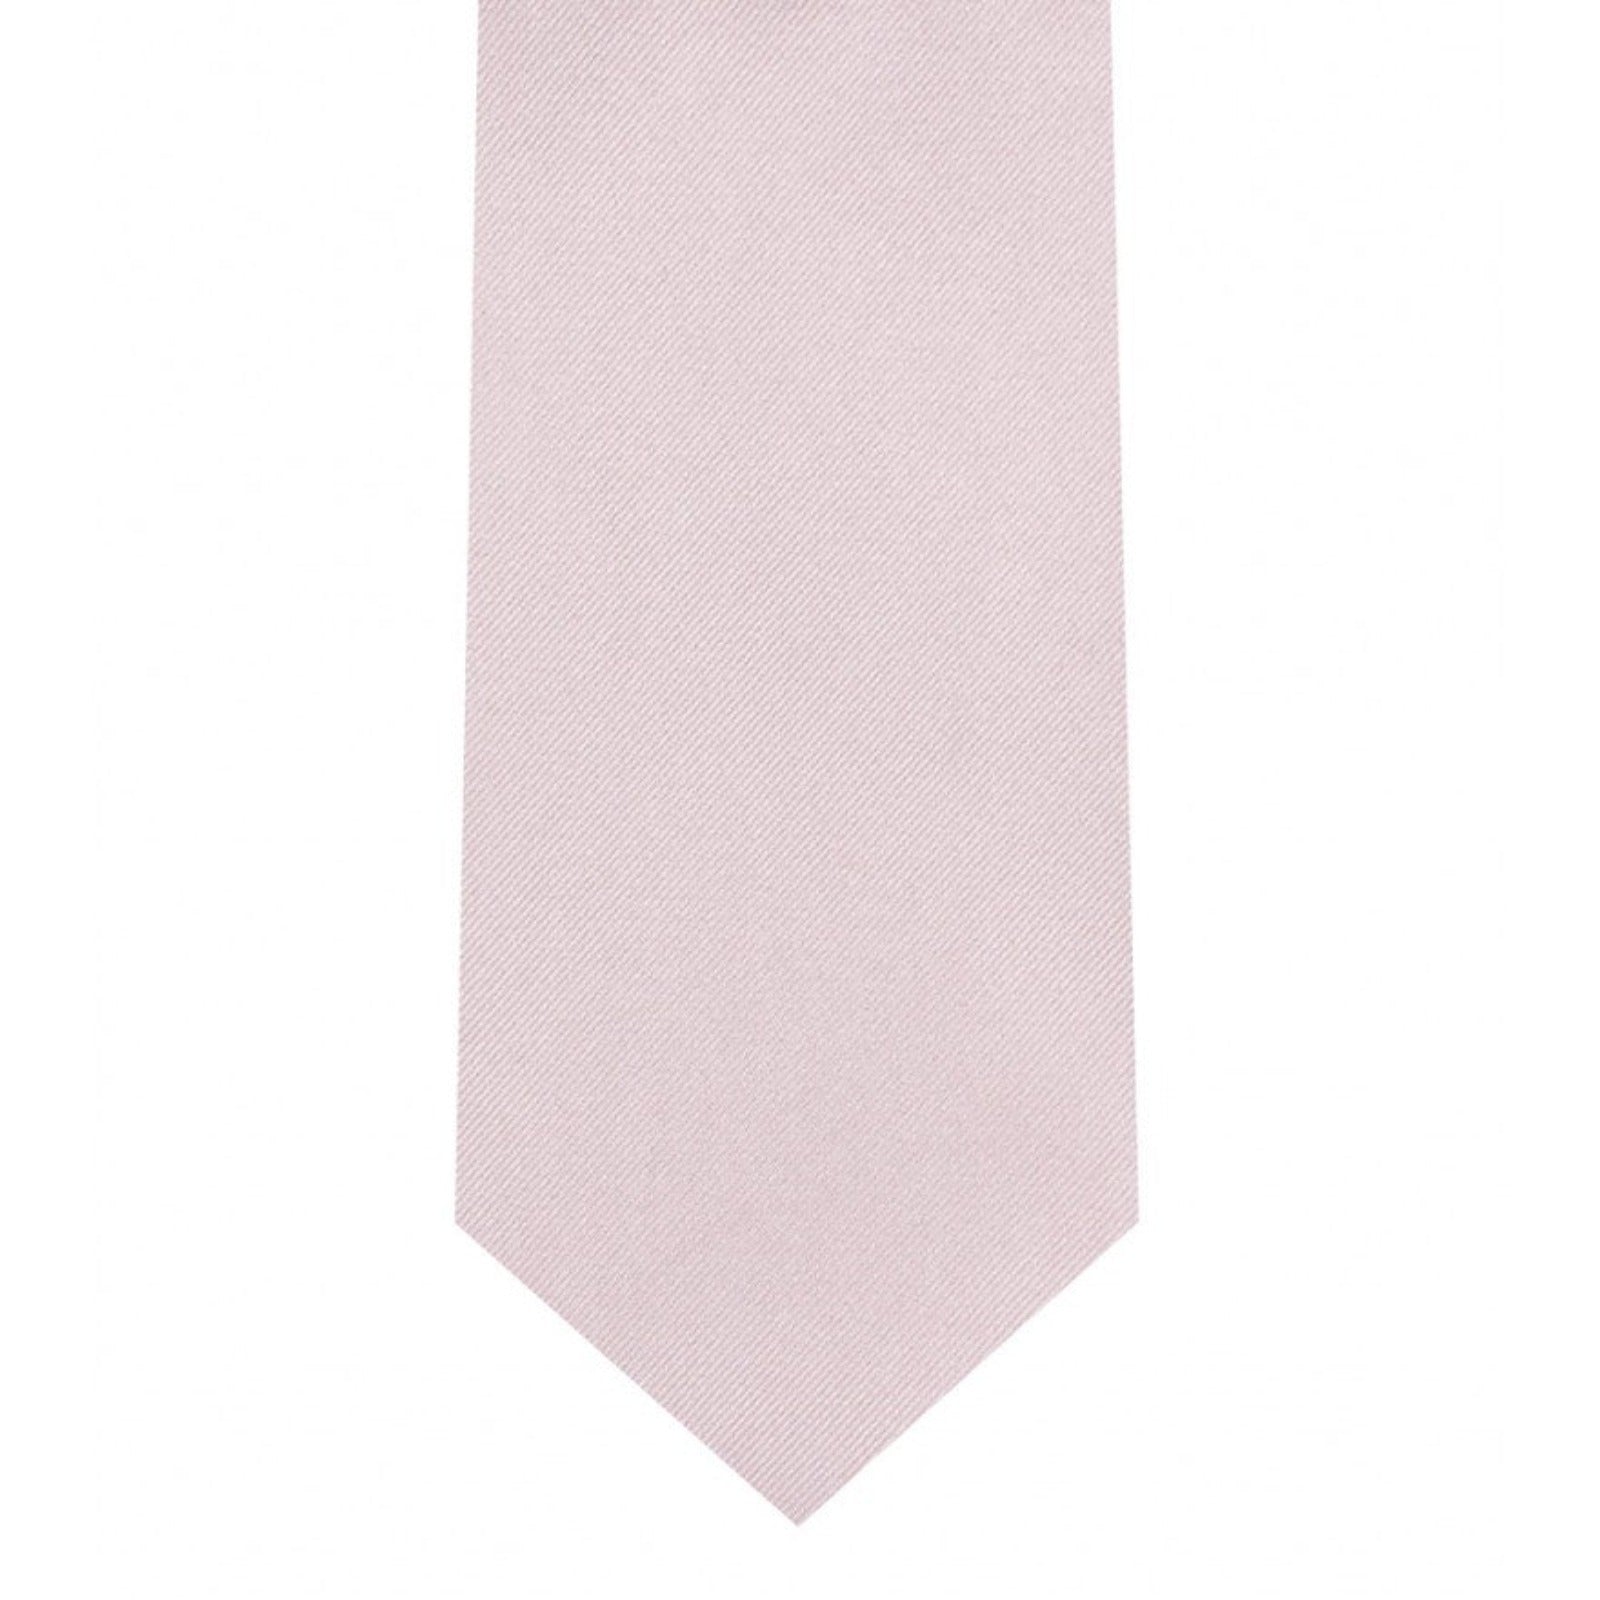 Classic Light Pink Tie Skinny width 2.75 inches With Matching Pocket Square | KCT Menswear